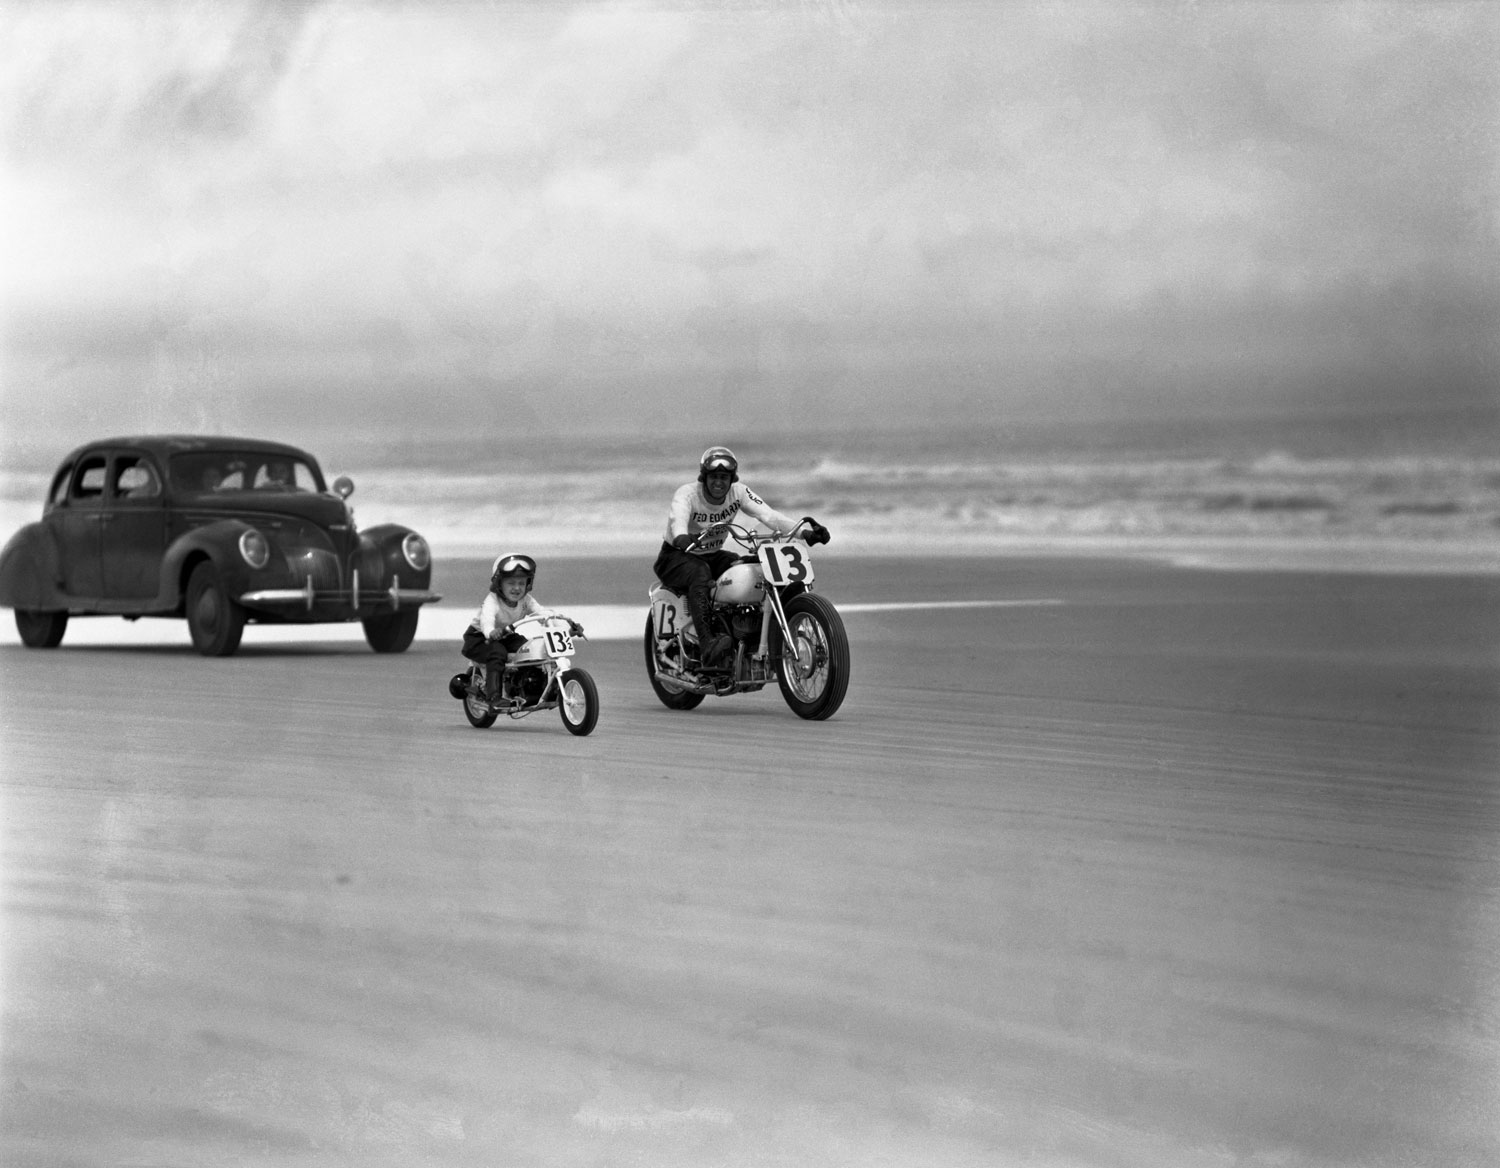 On matching full-size and miniature Indian motorcycles, a man and a boy ride along the beach, Daytona Beach, Florida, March 1948.